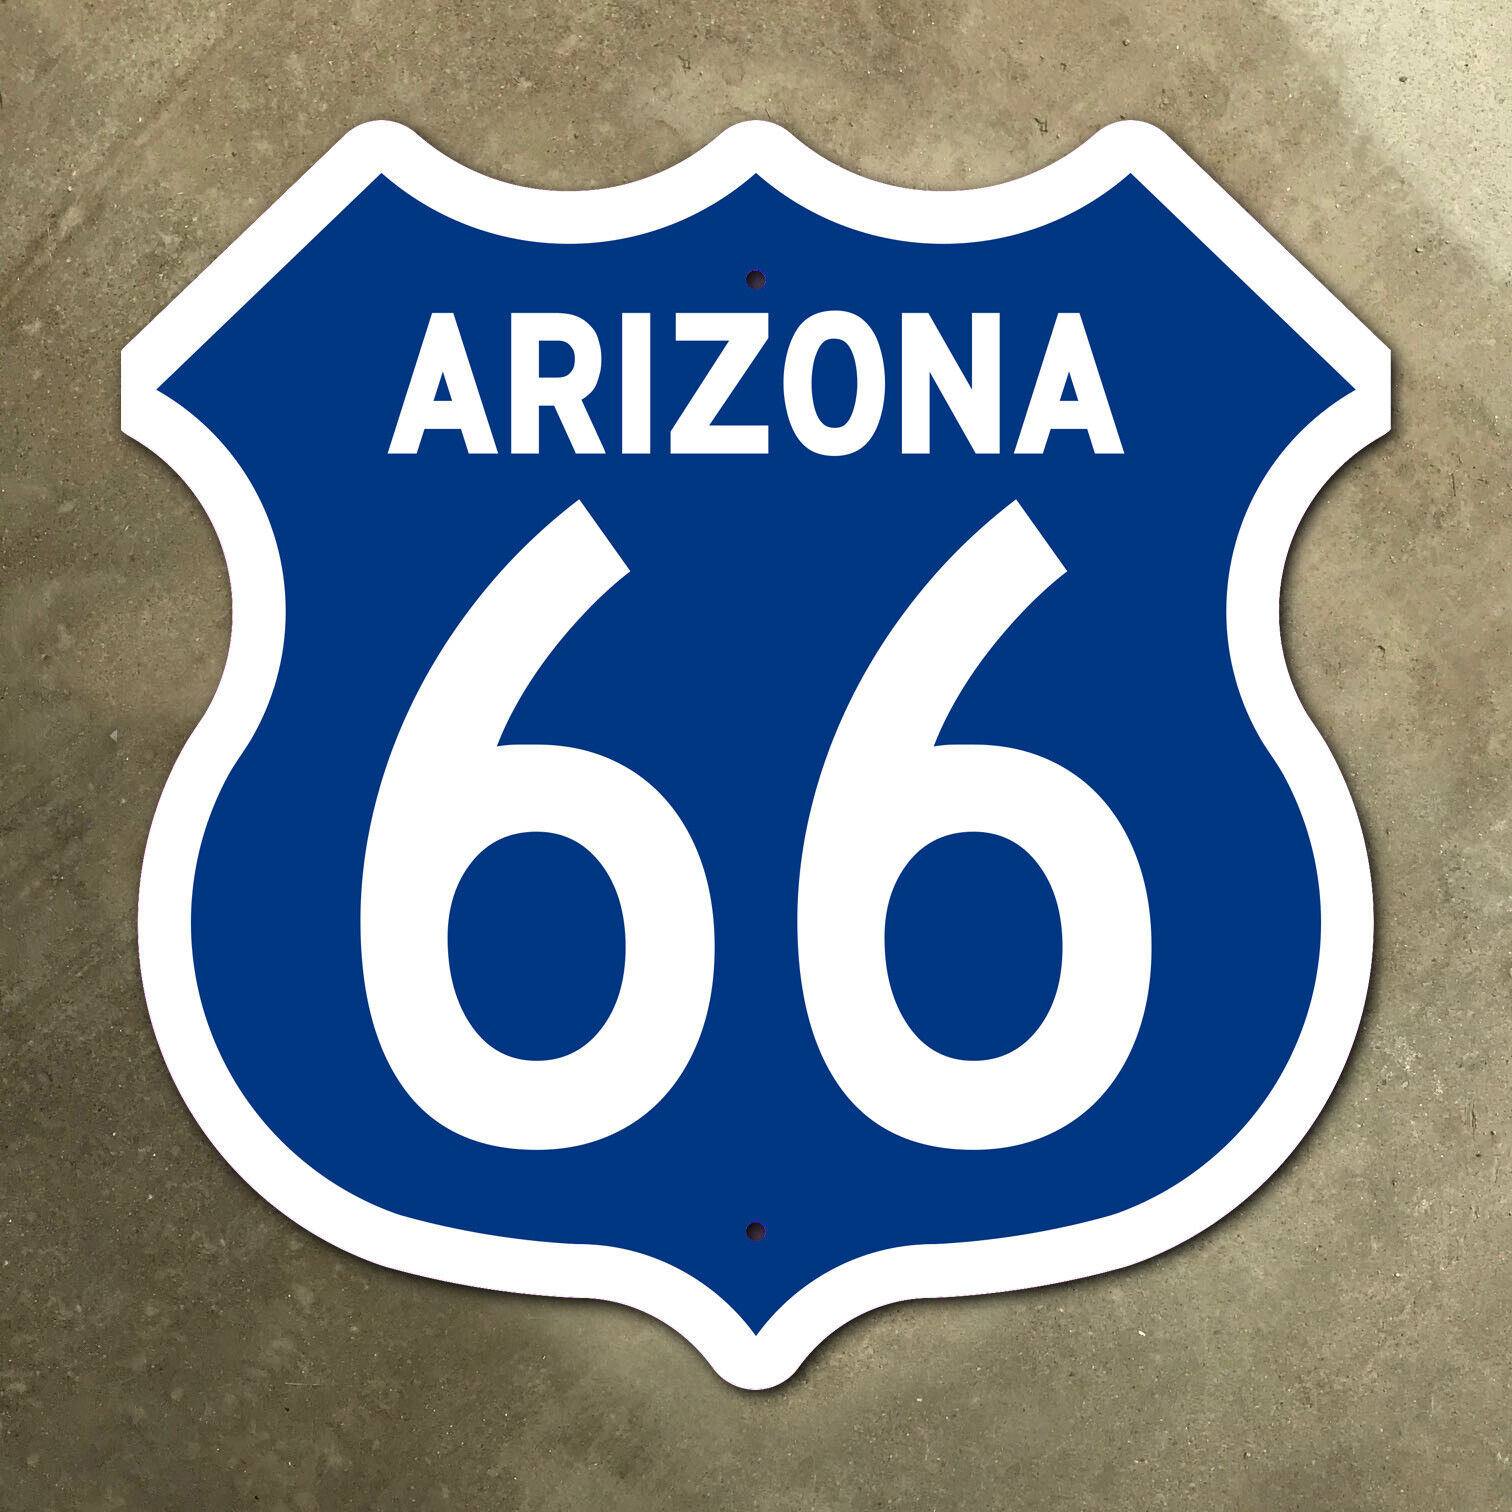 Arizona US route 66 highway marker sign mother road 1960 blue Flagstaff 16 x 16